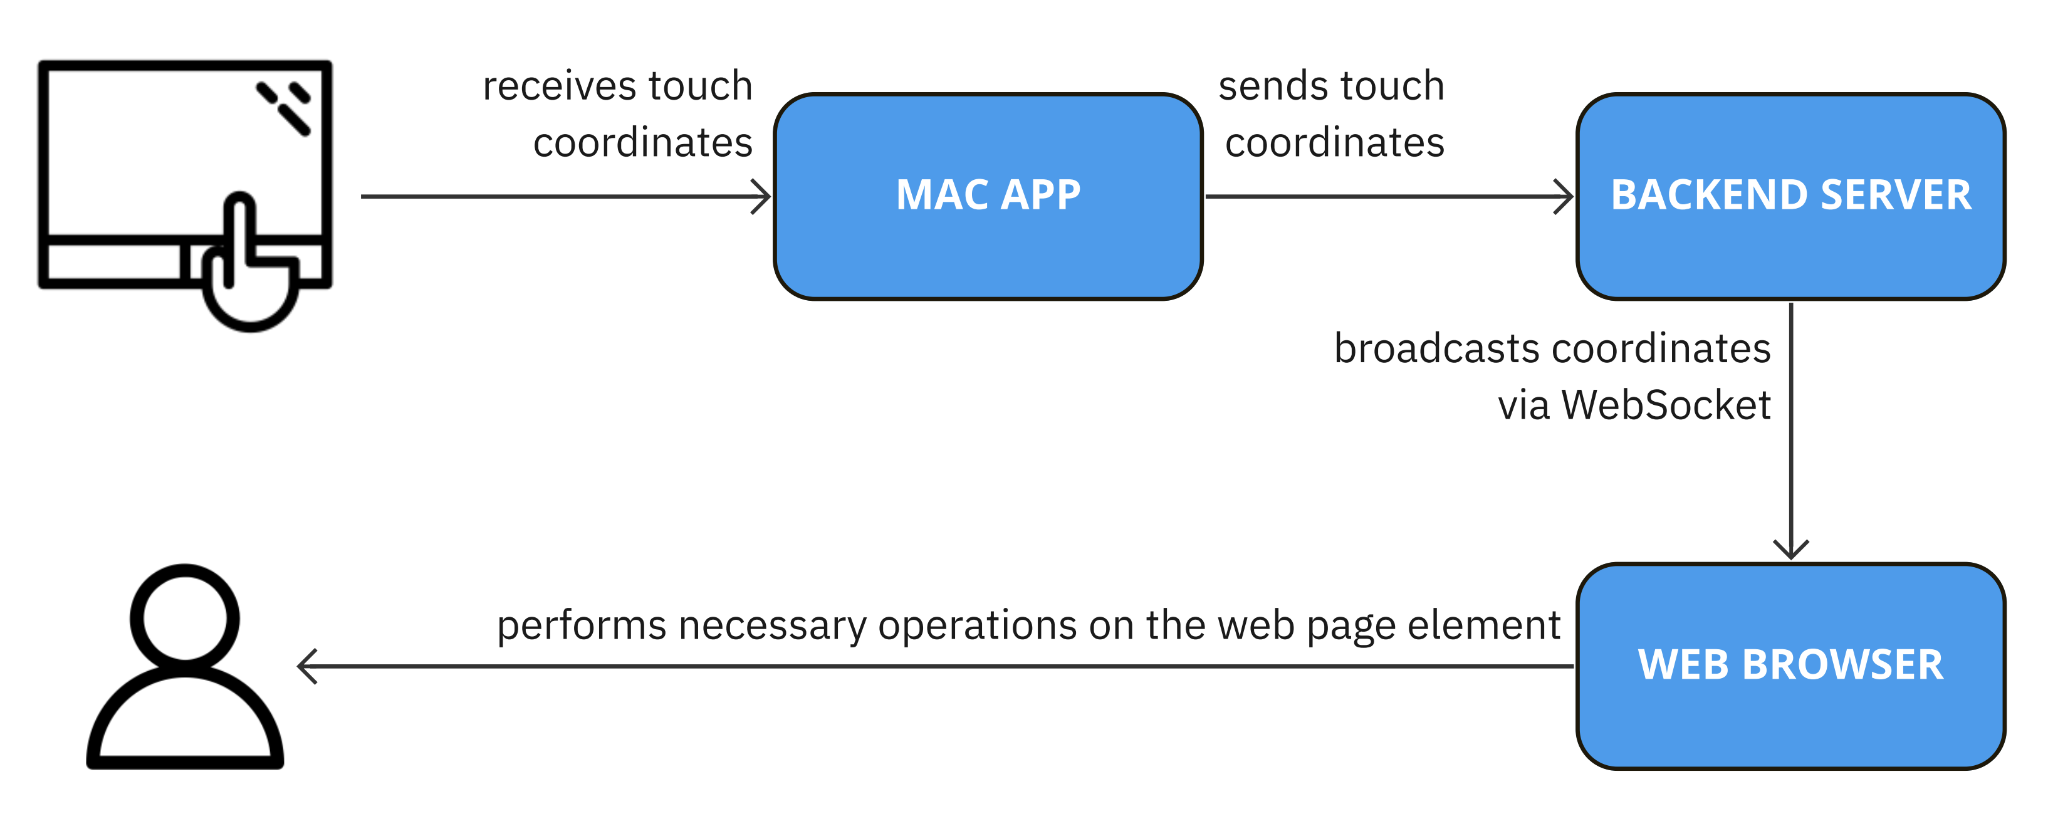 Diagram showing the data flow from touchpad to Mac app to backend server to browser to user.